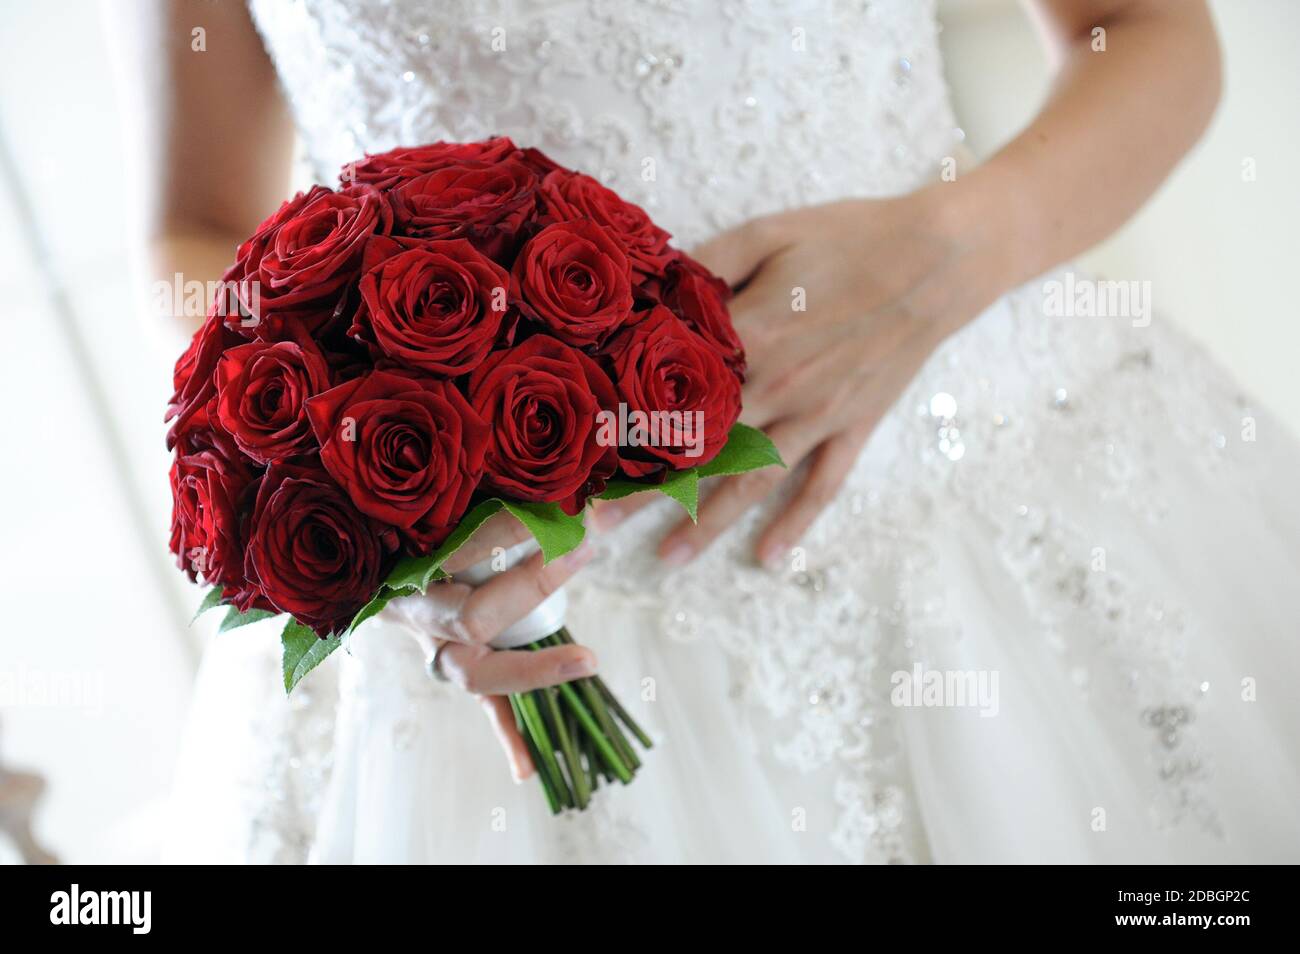 Bride holding a posy of deep red roses symbolising everlasting love in a close up on her hand in front of her bridal gown Stock Photo